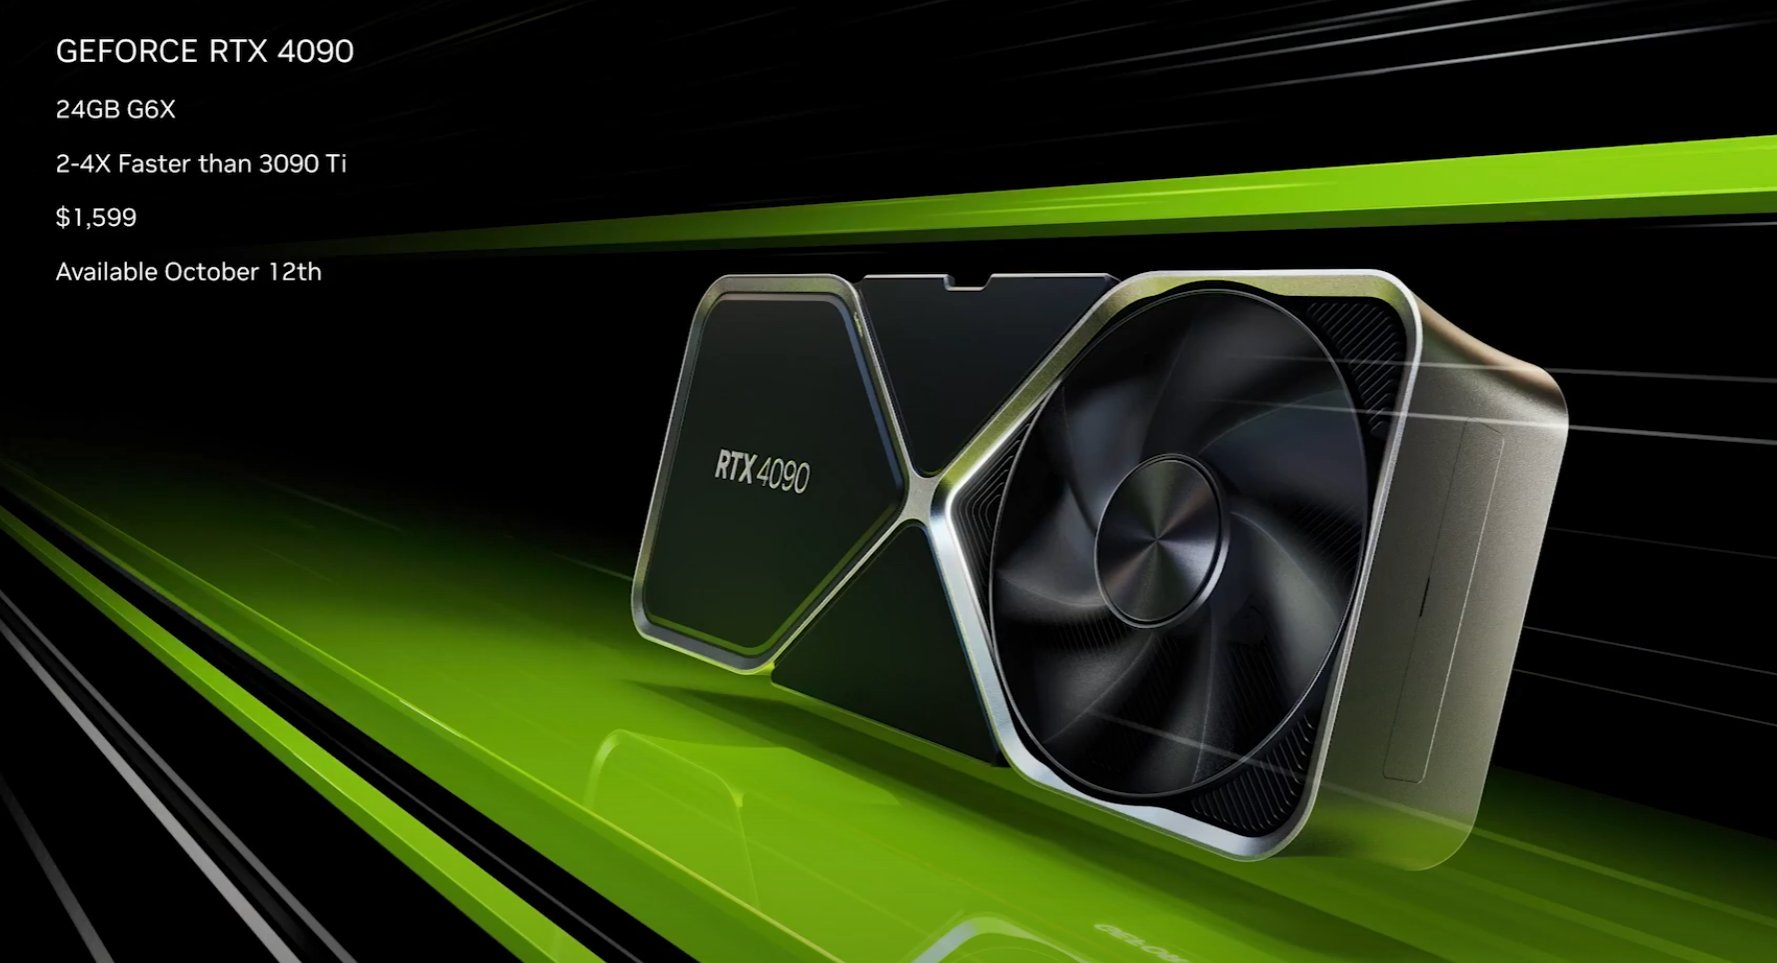 Nvidia GeForce 4090 announced CUDA cores, GB VRAM, DLSS 3.0 support and a US$1,599 price tag - NotebookCheck.net News